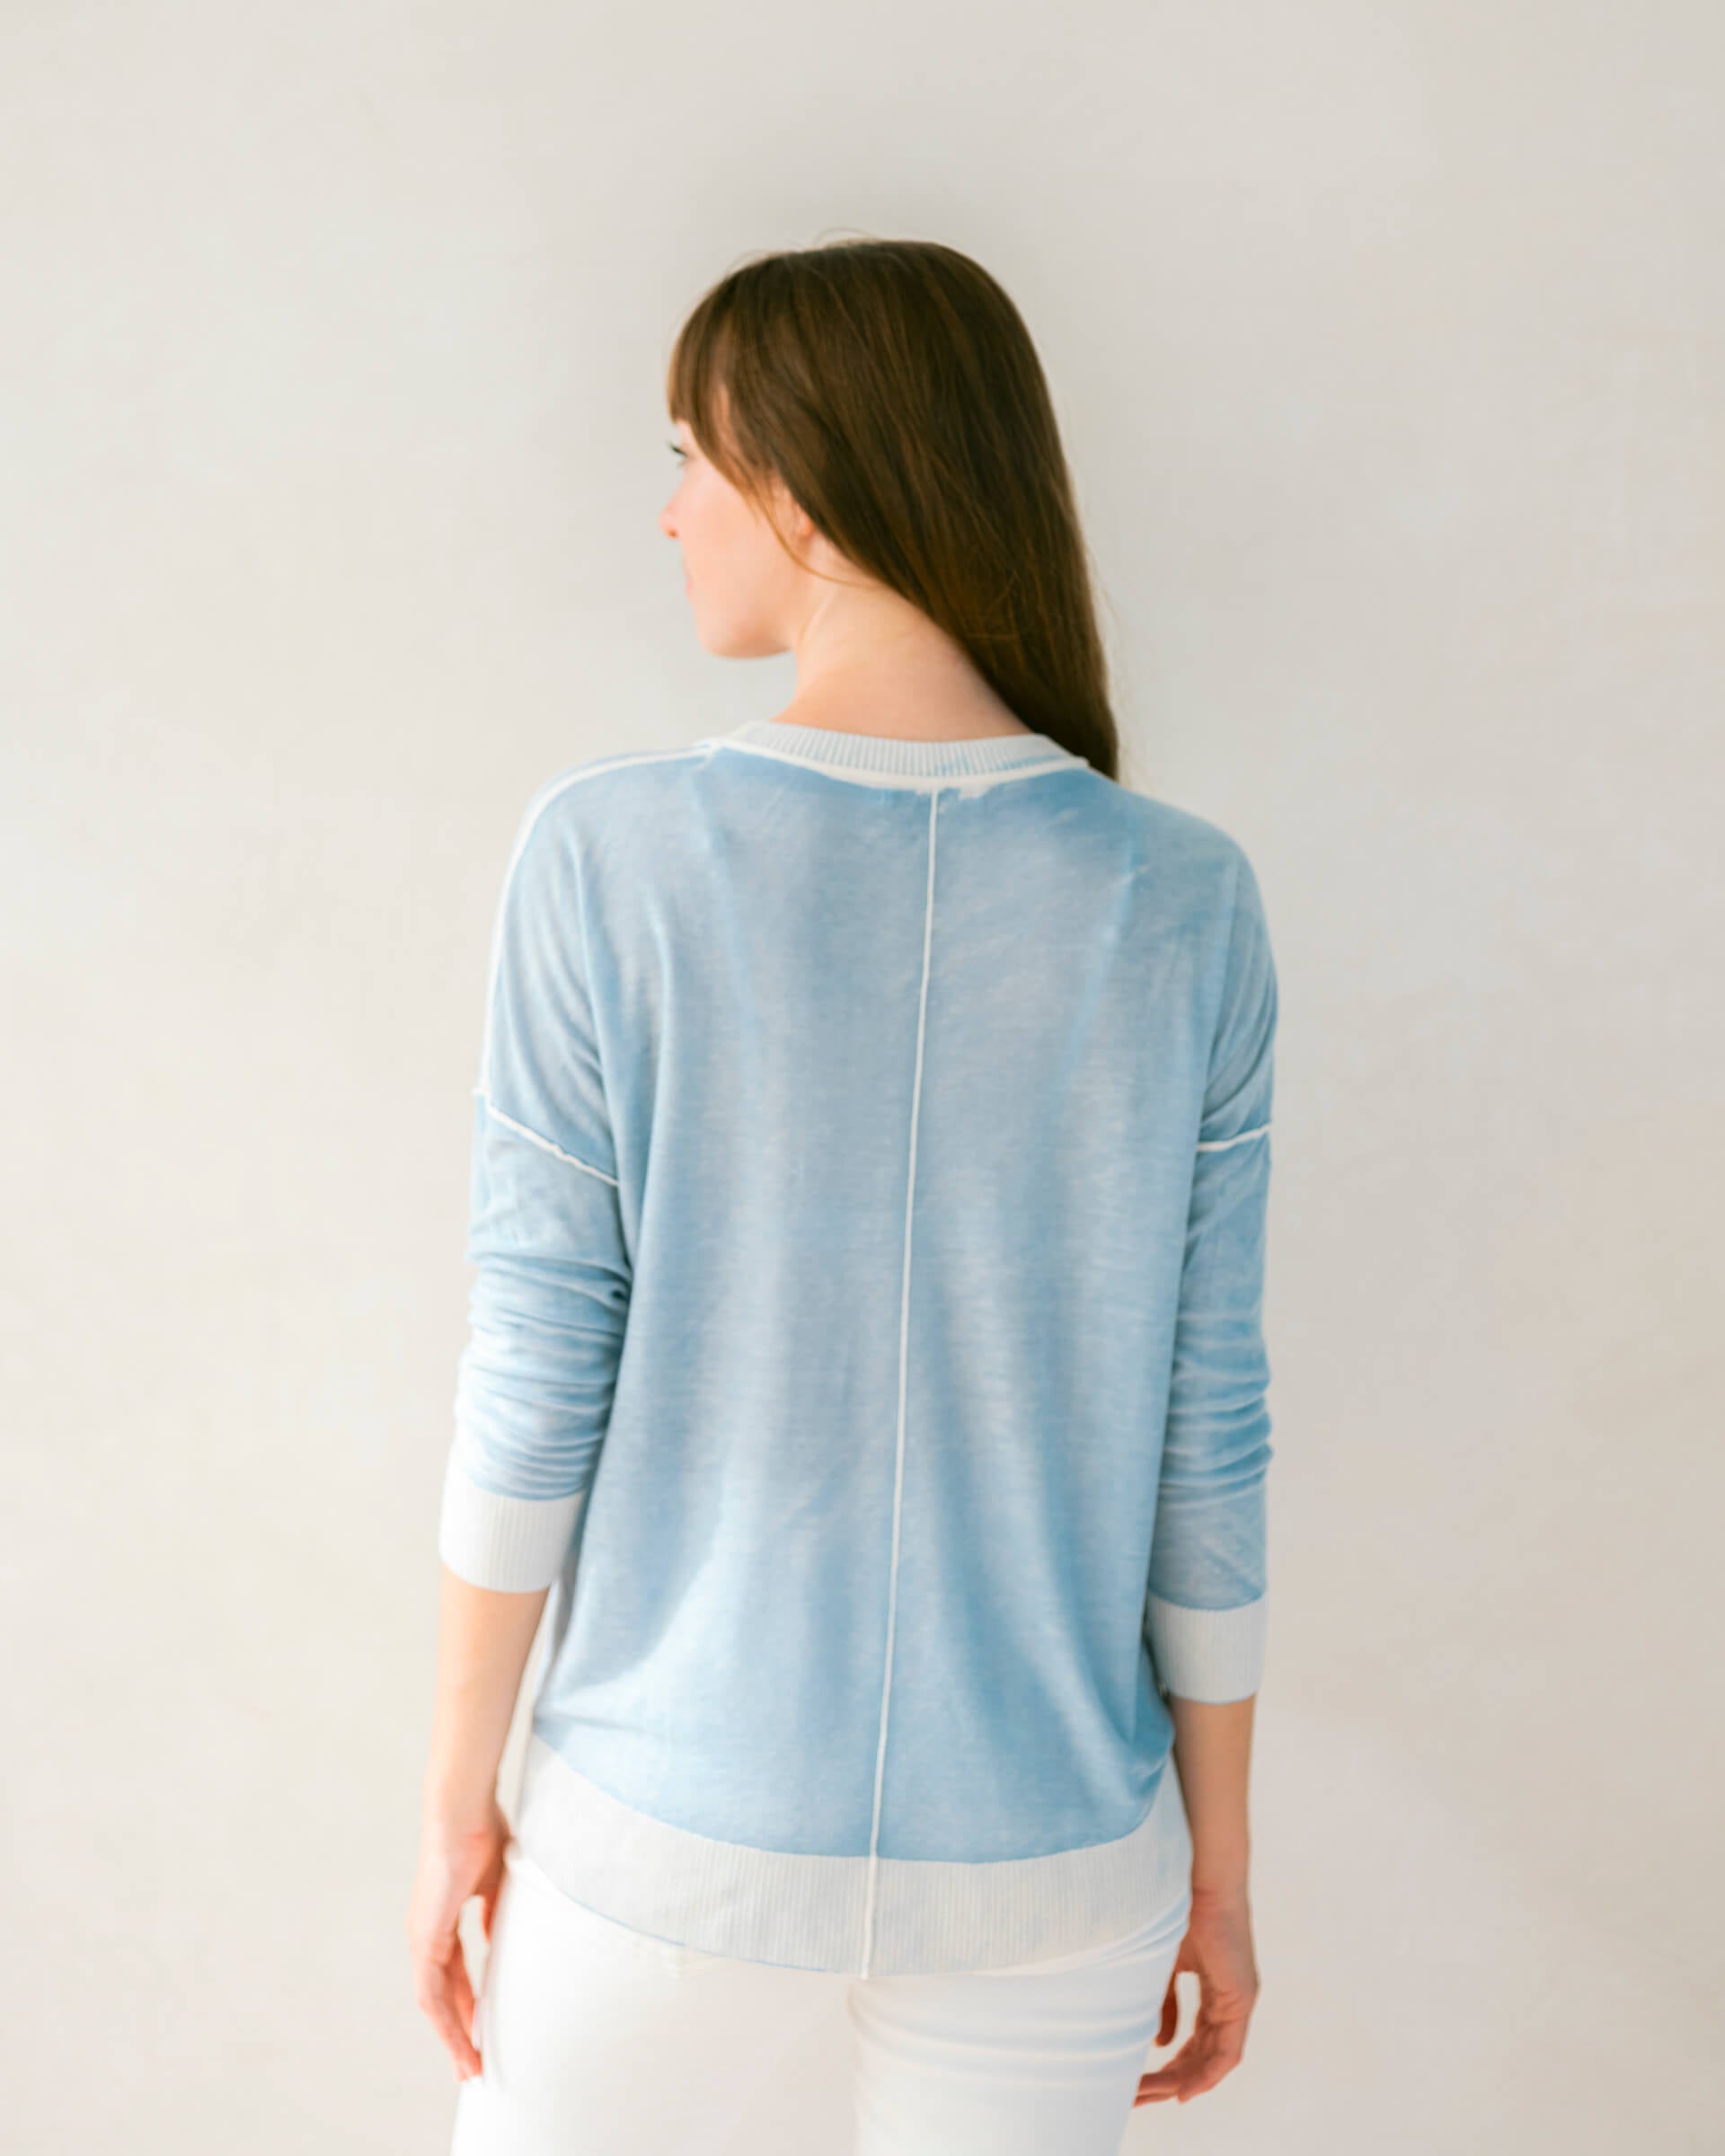 brunette female wearing light blue sweater standing backwards in front of a white wall 